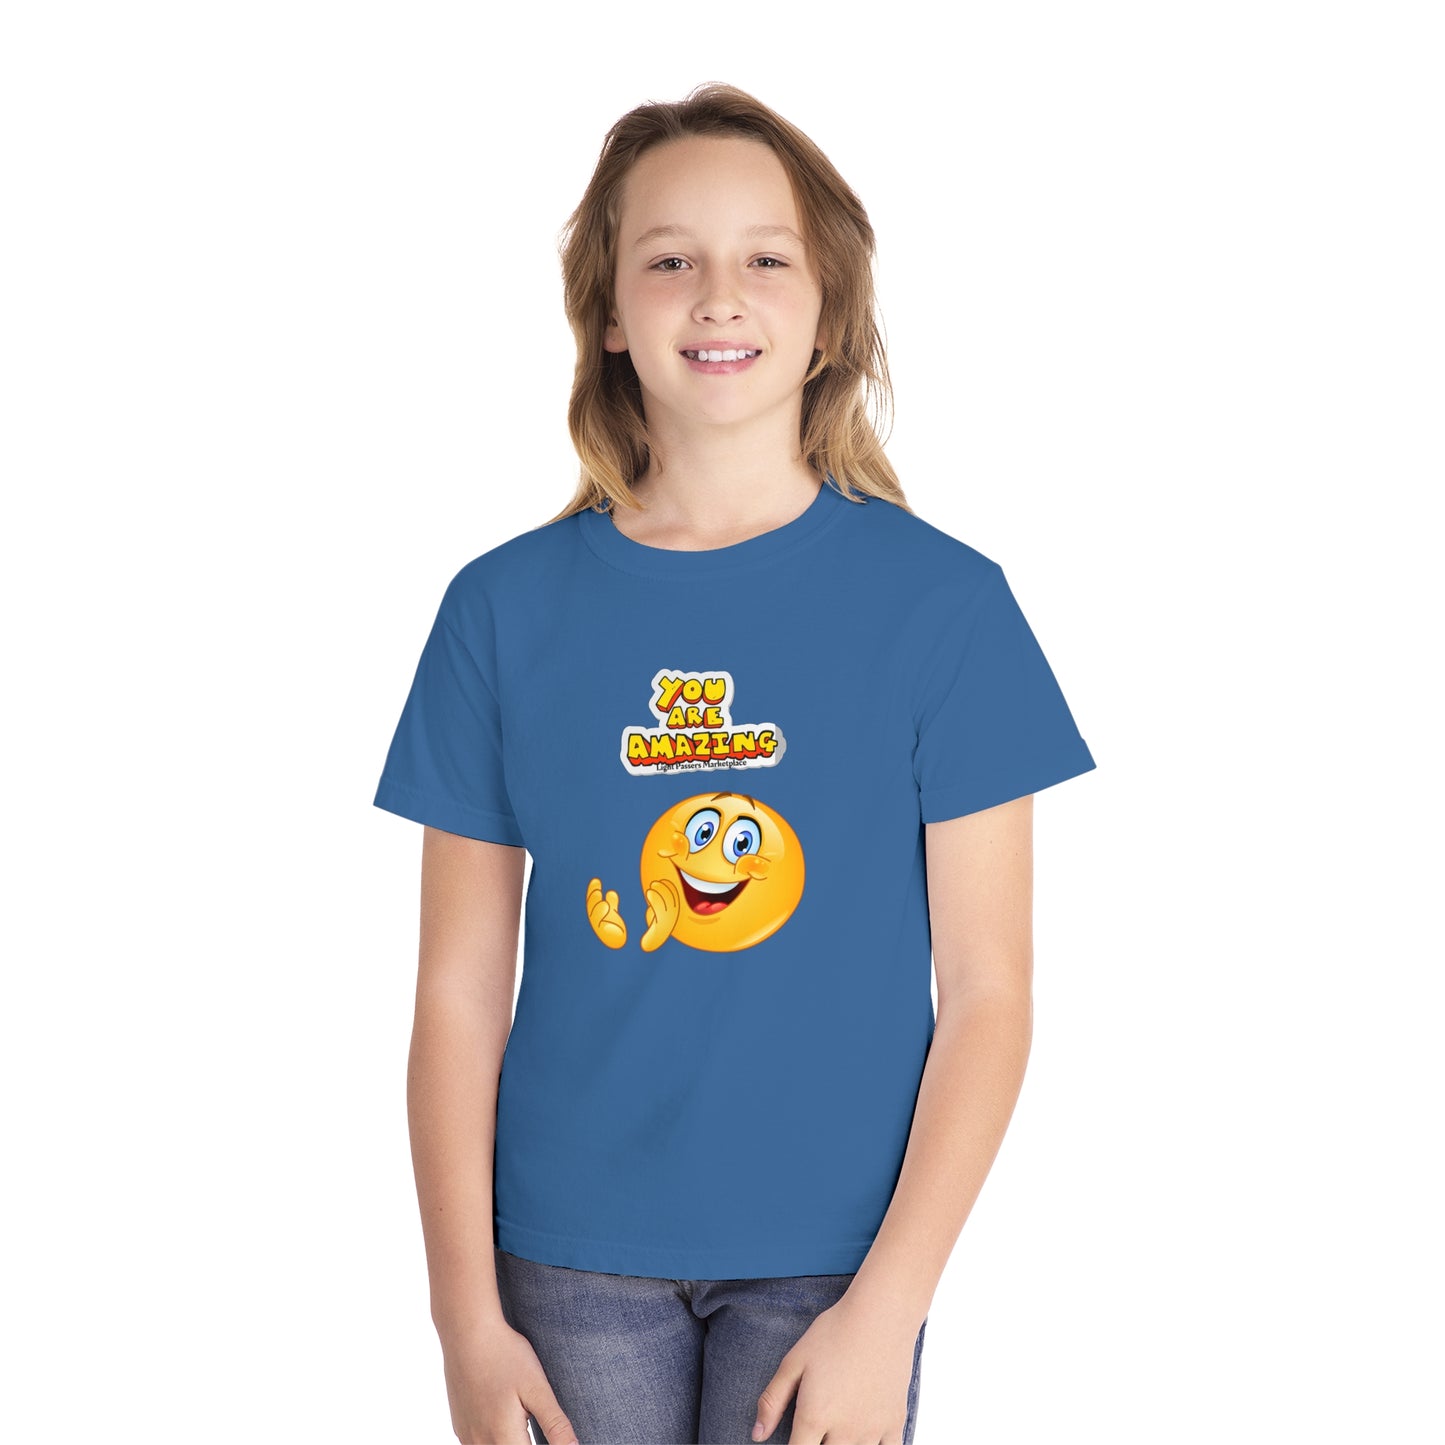 Light Passers Marketplace Empowering You are Amazing Youth Midweight T-shirt Simple Messages, Mental Health